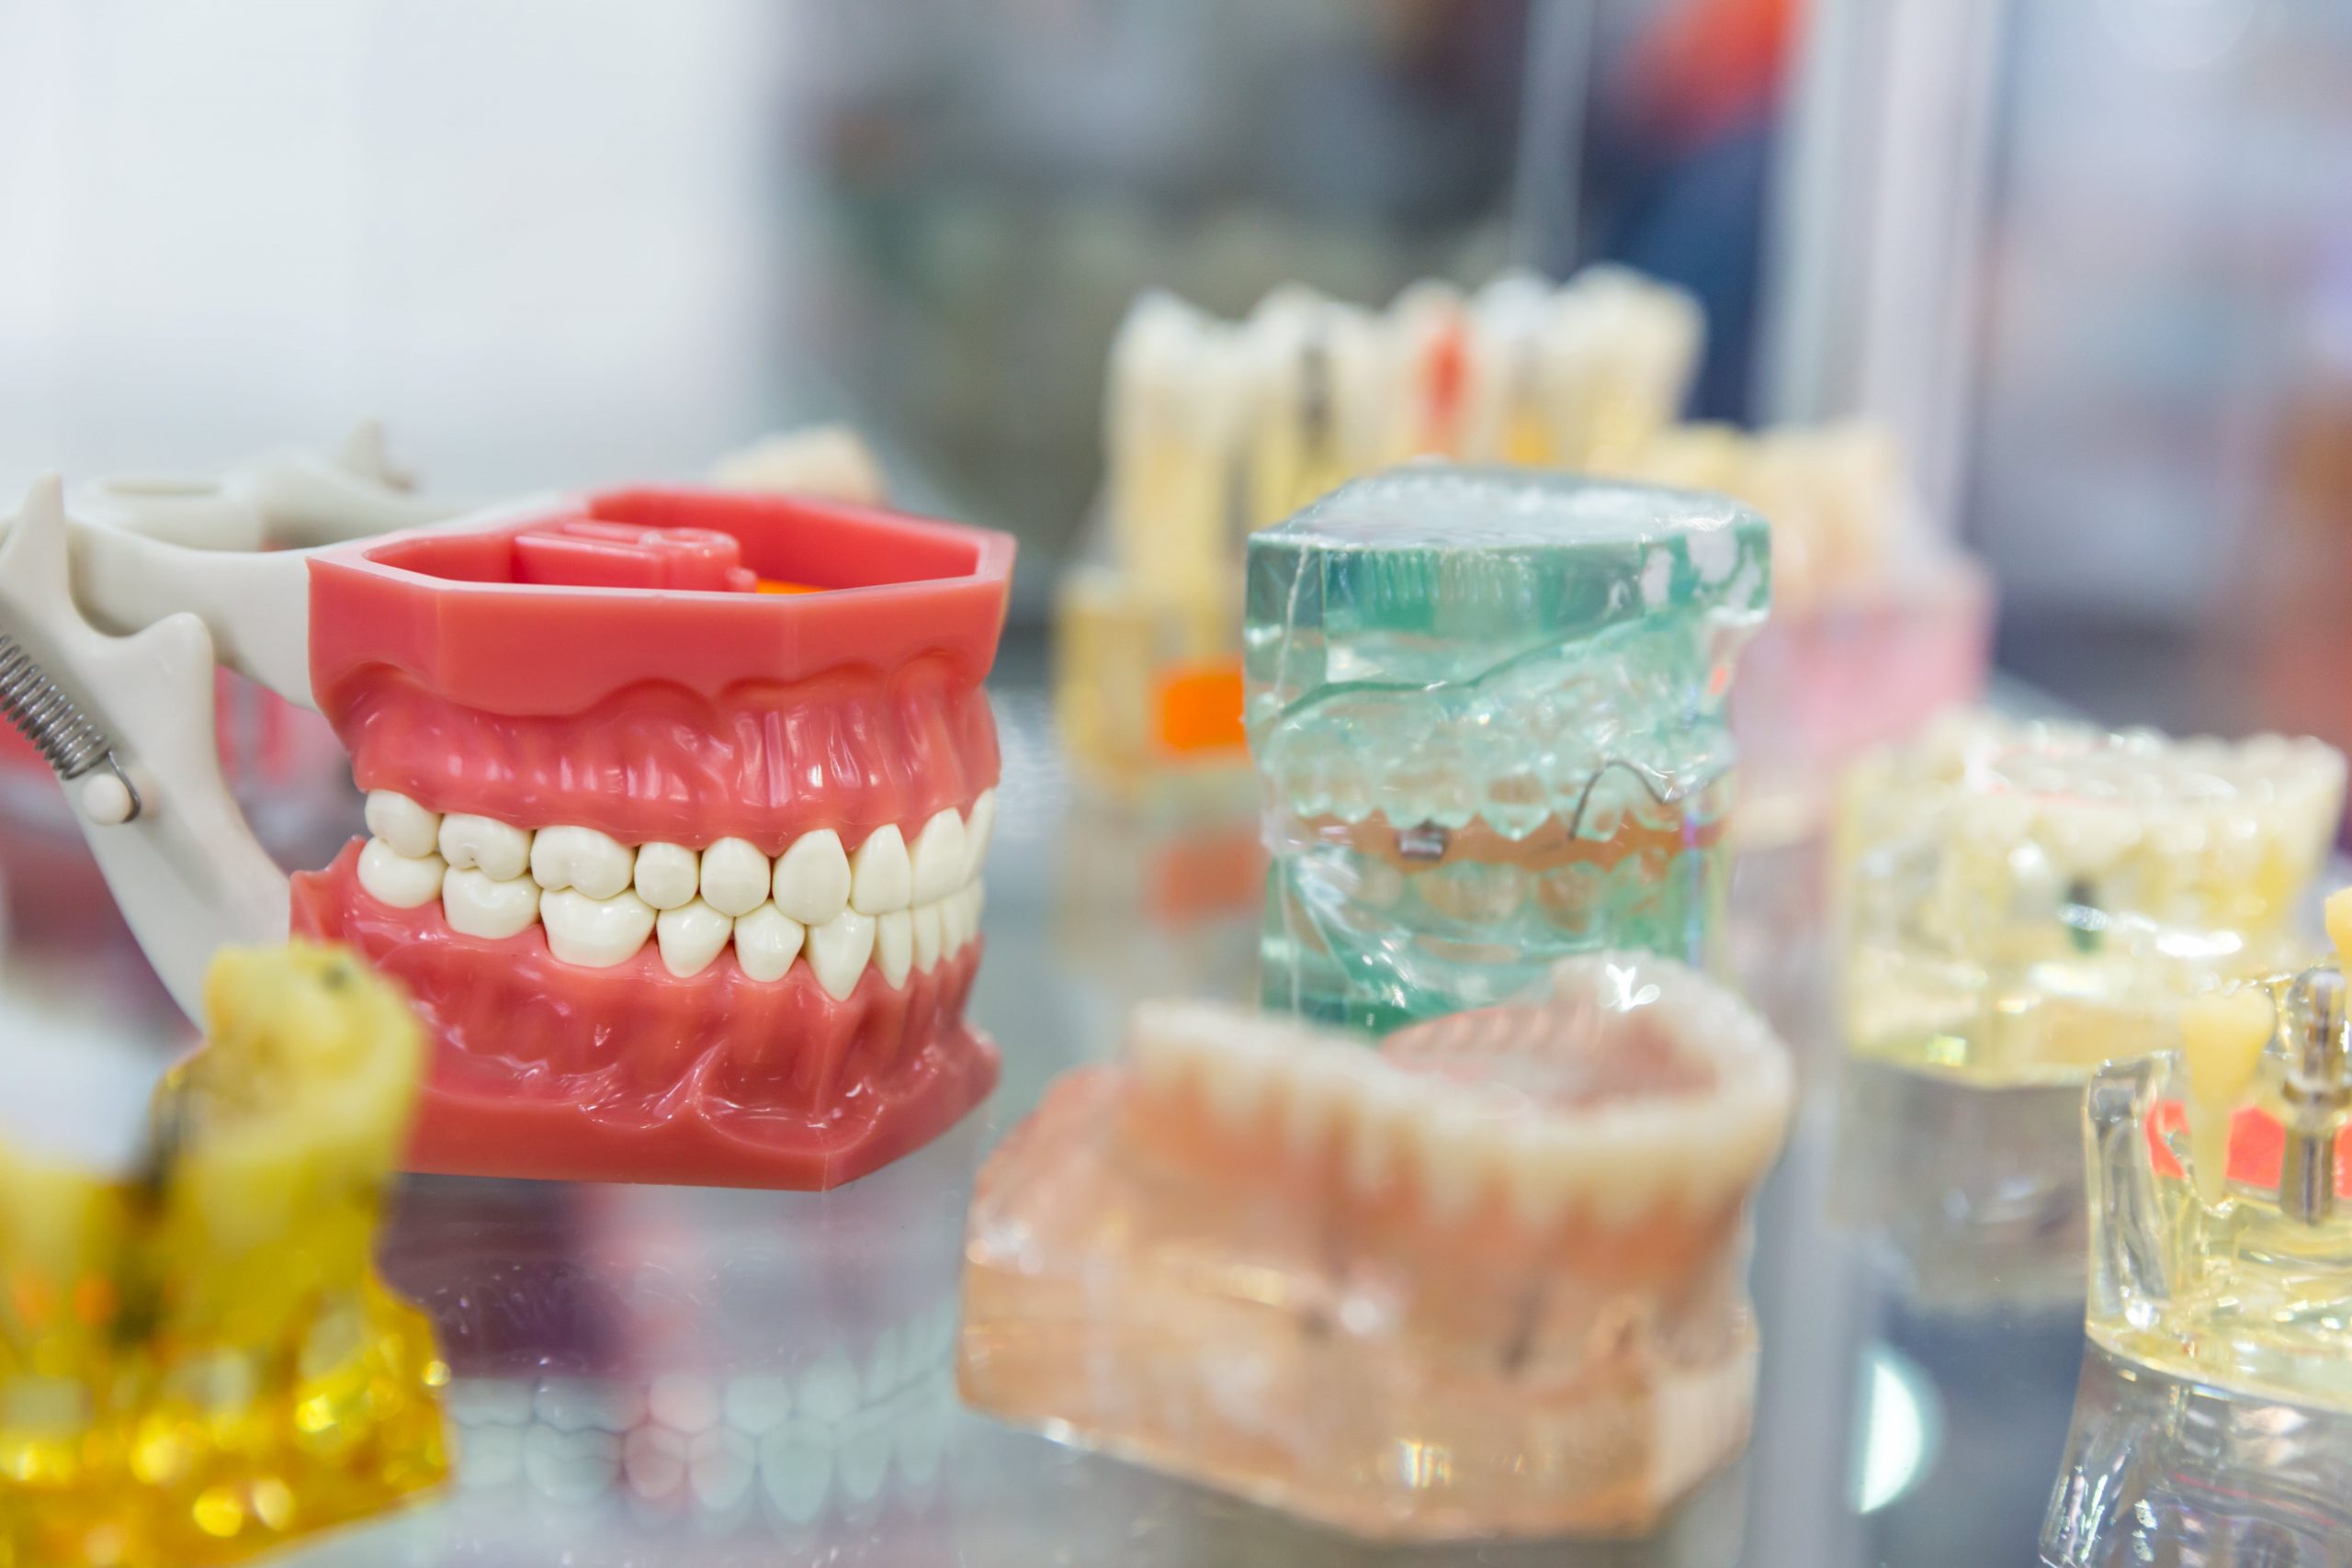 What Is the Dental Implant Procedure in Turkey?